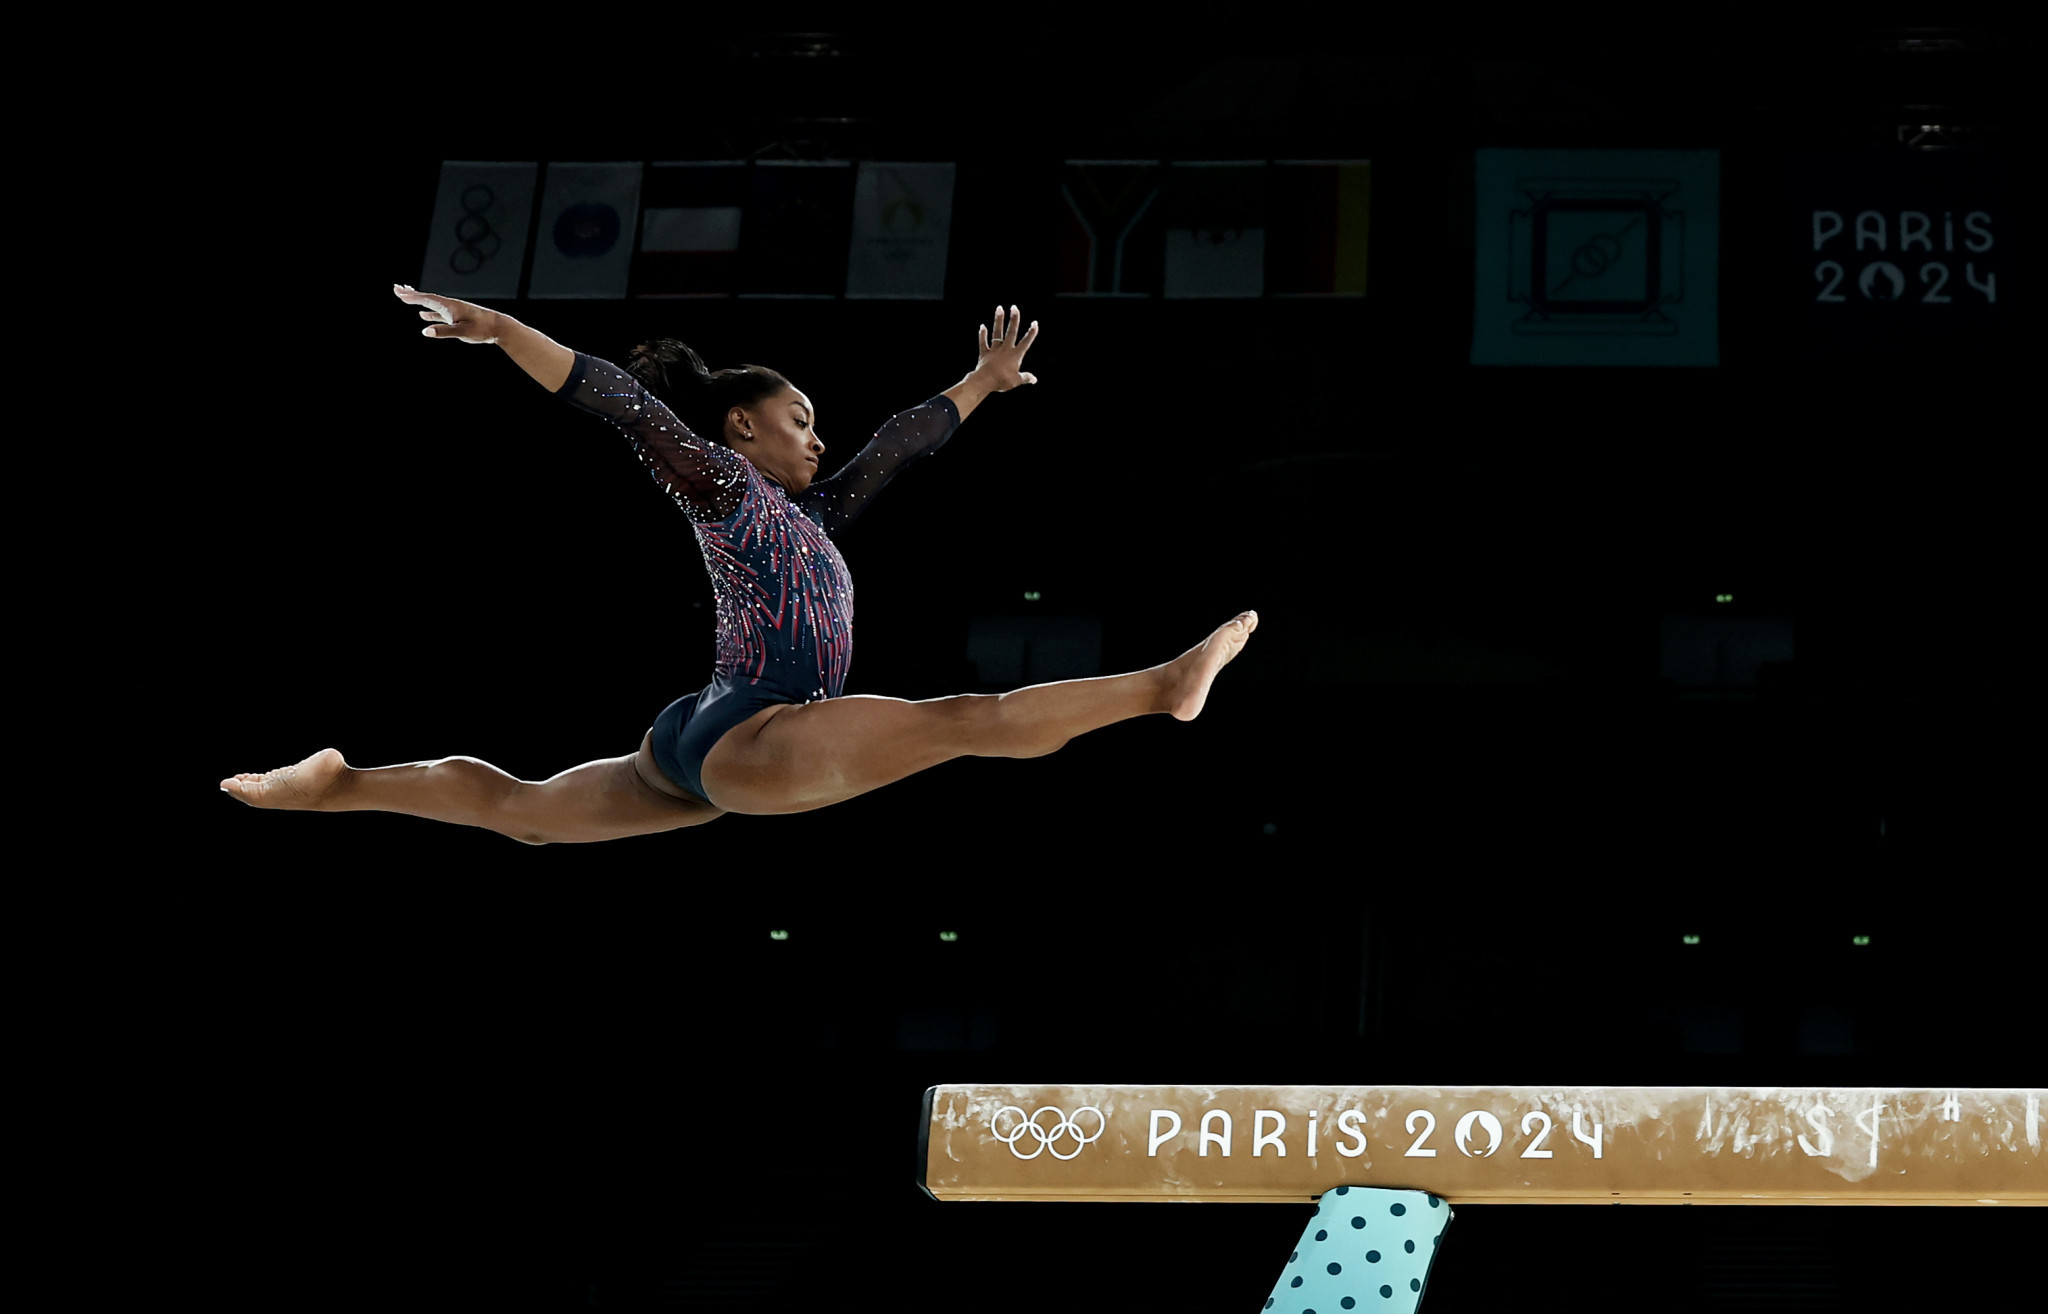 Simone Biles of Team United States at the Paris 2024 Olympic Games. GETTY IMAGES